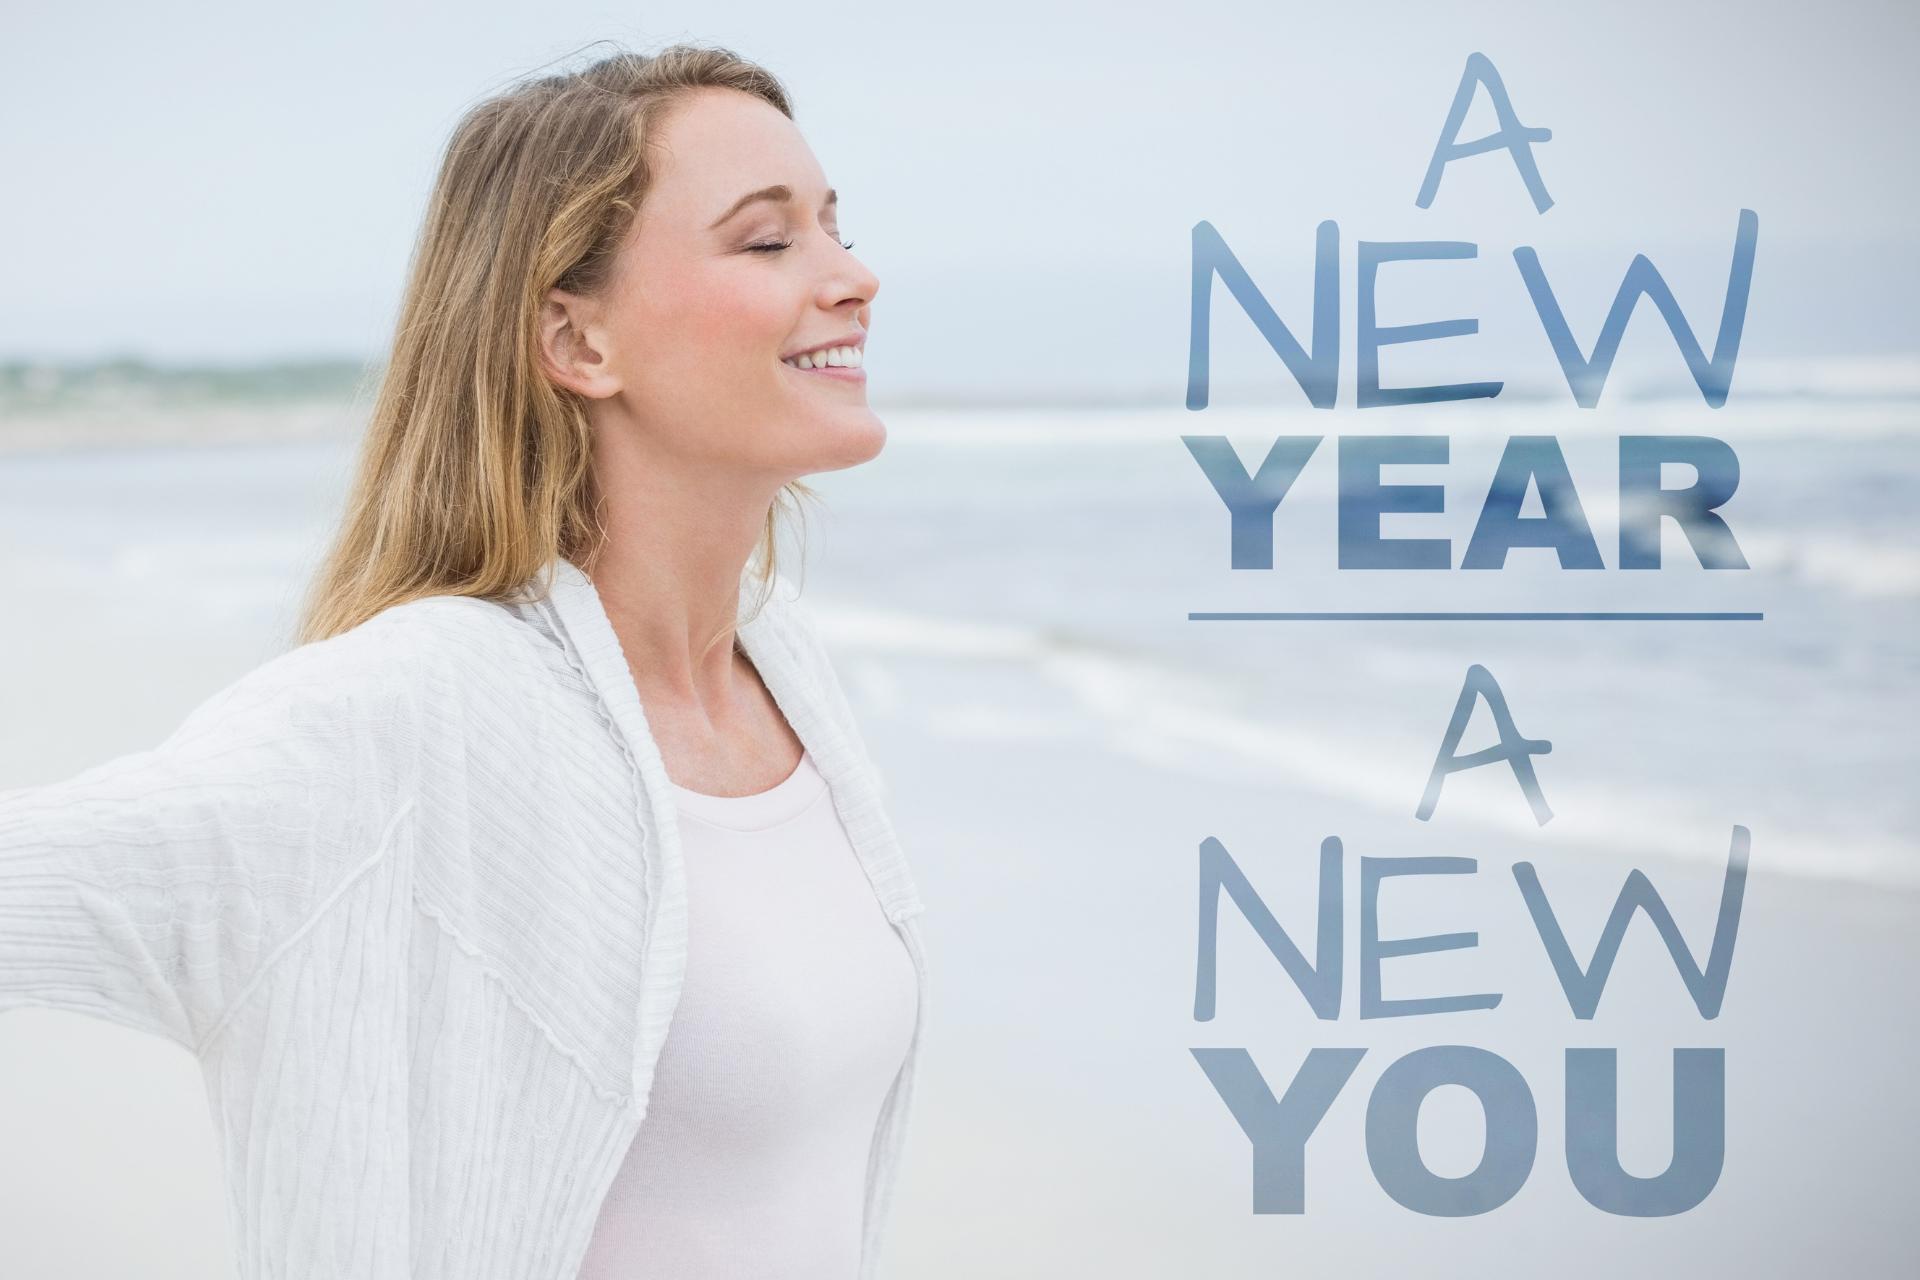 5 Resolutions To Improve Your Mental Health This Year